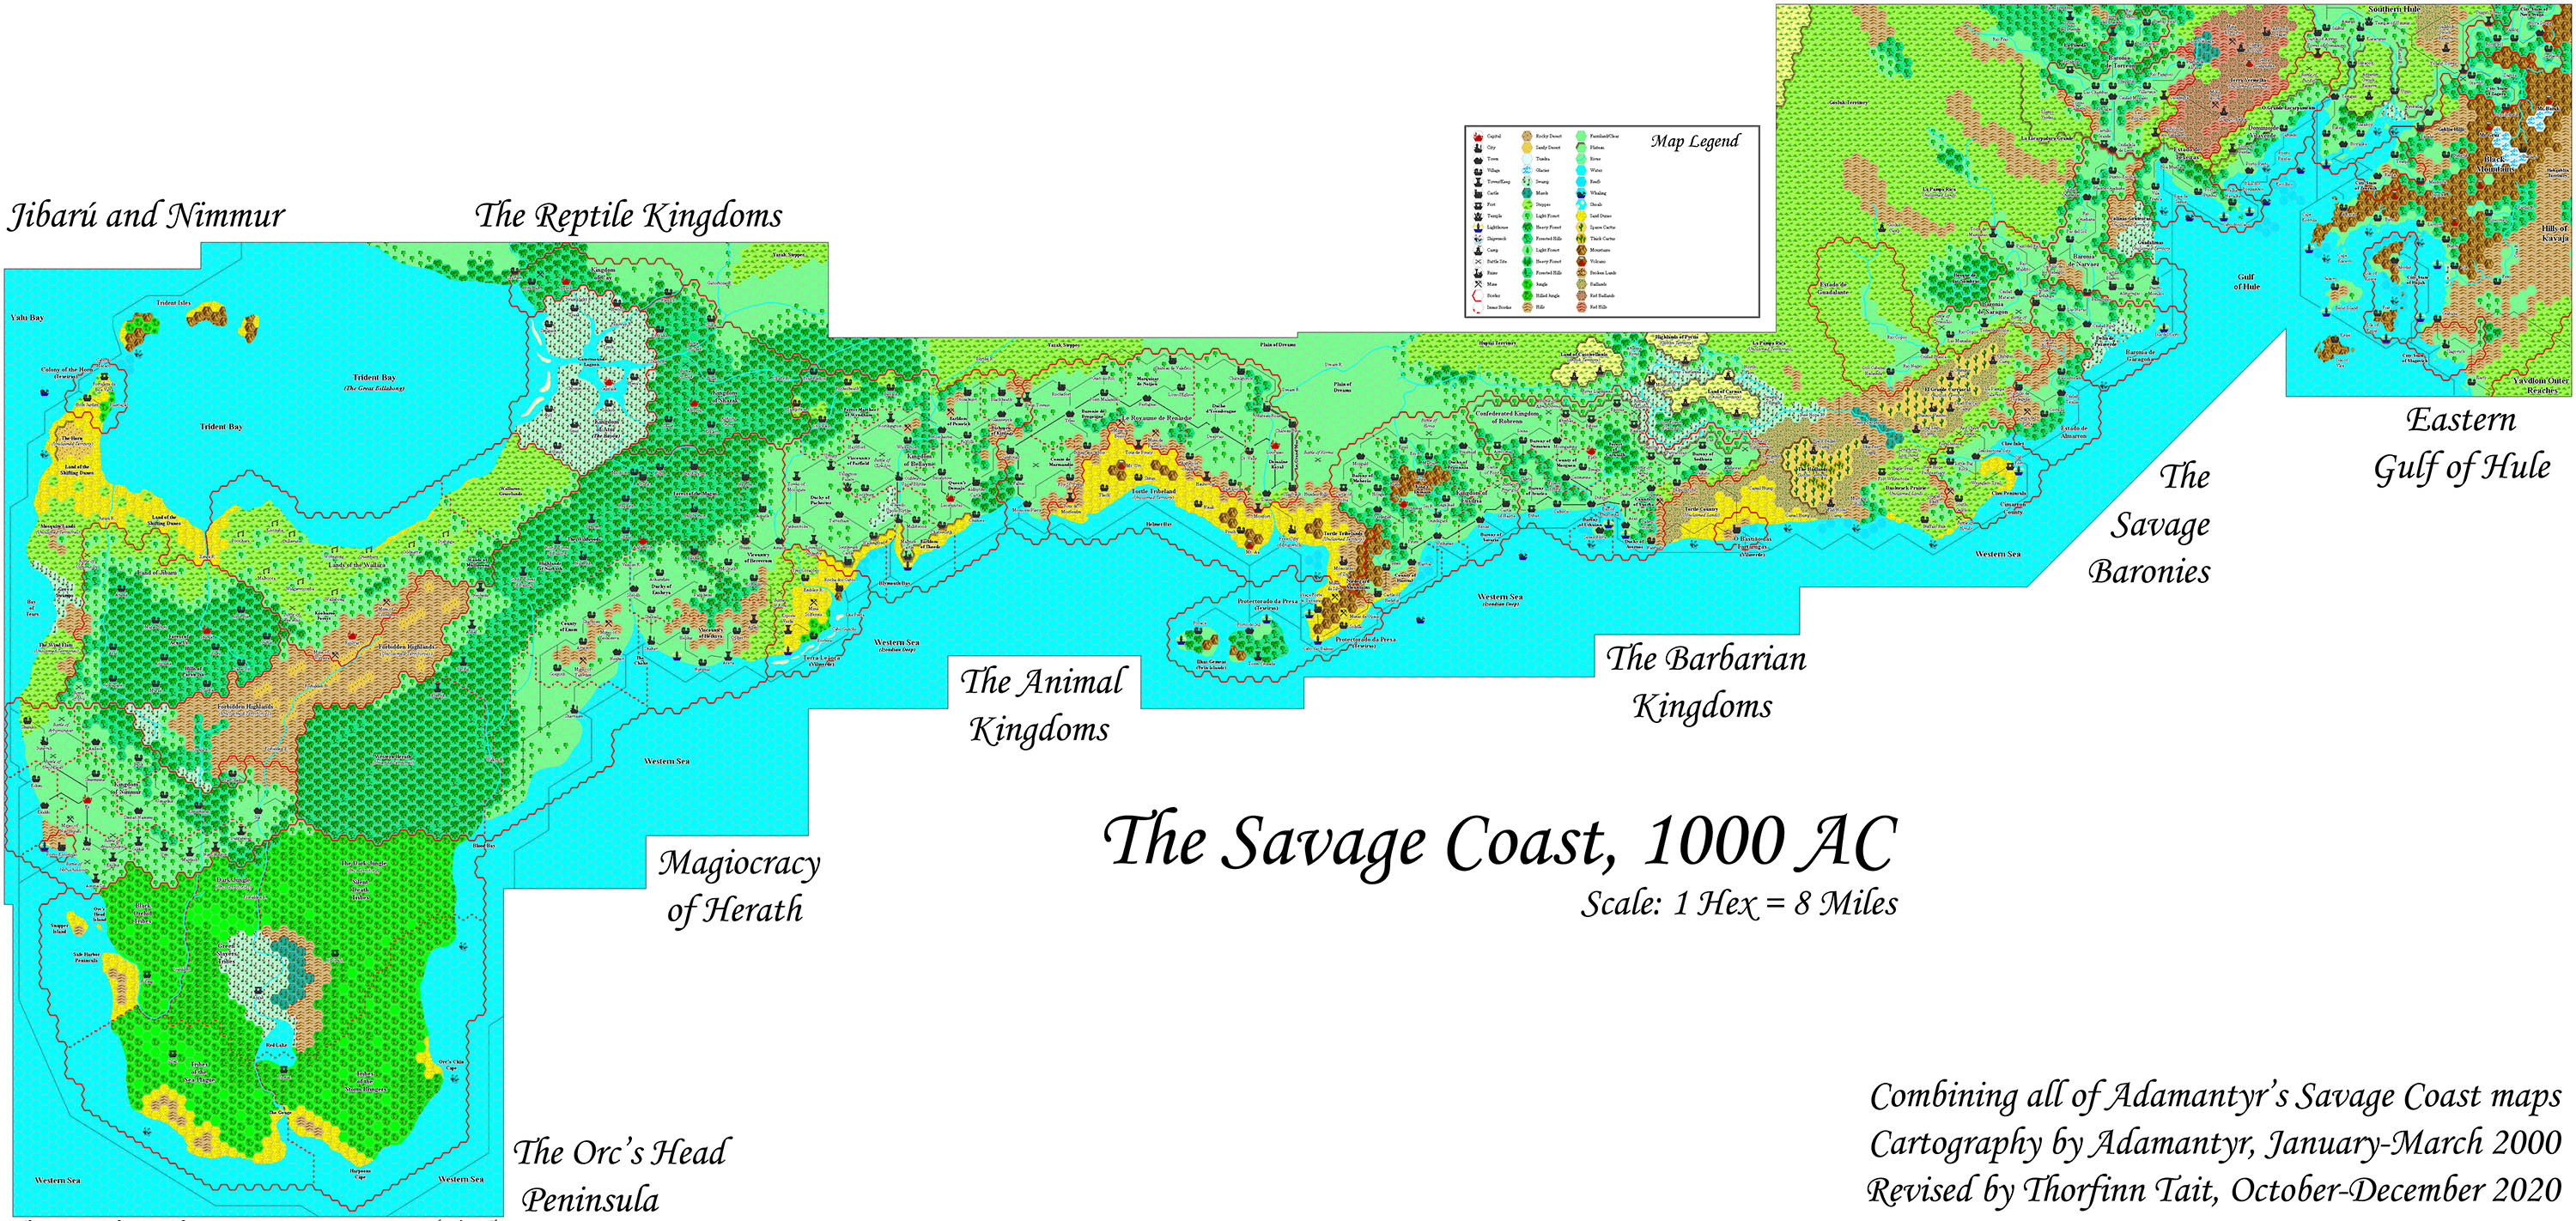 The Savage Coast, 8 miles per hex by Adamantyr, Revised by Thorf, December 2020